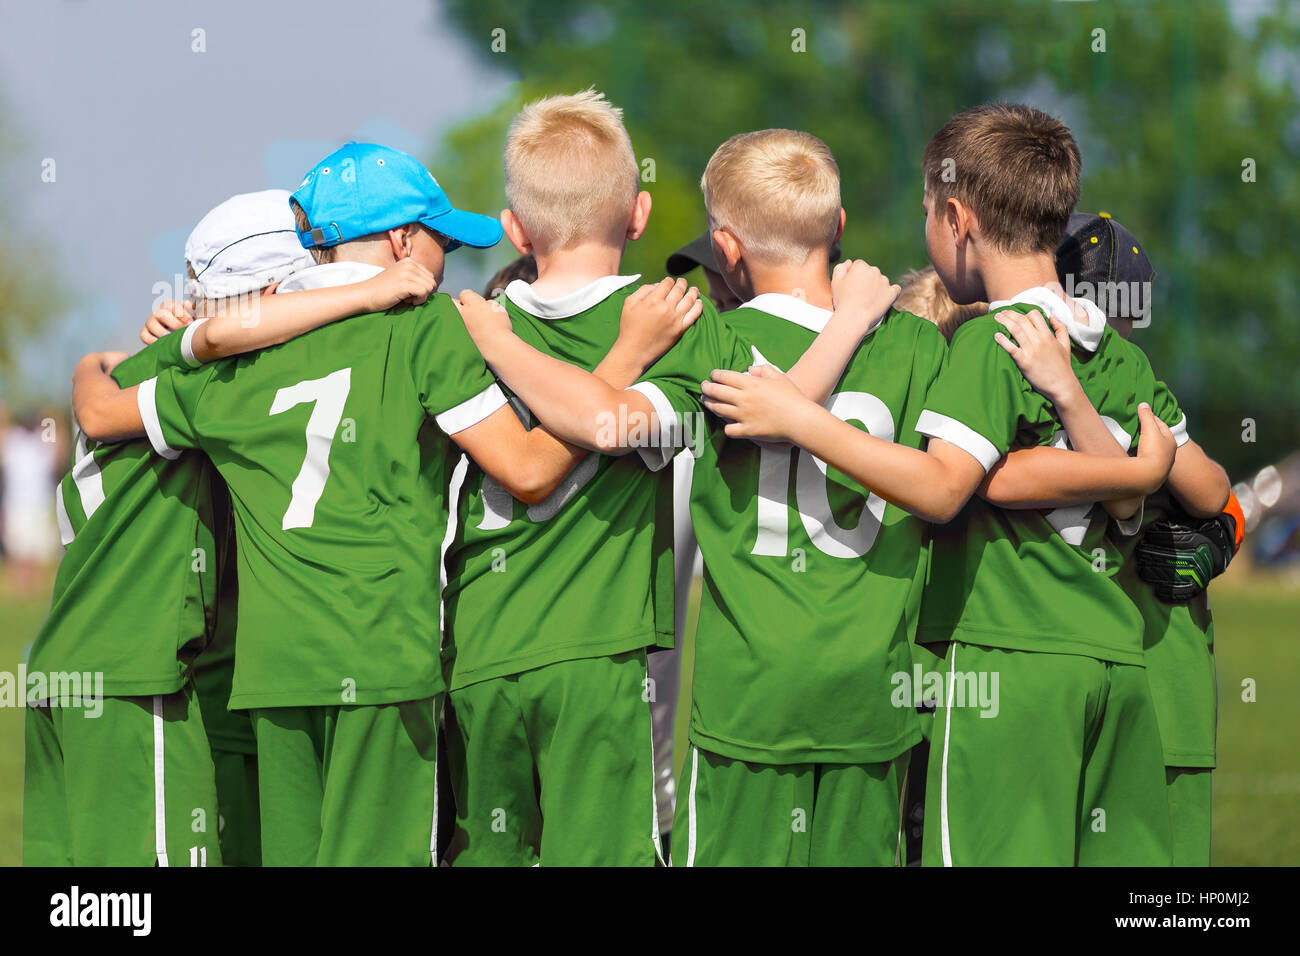 Kids Play Sports. Children Sports Team United Ready to Play Game. Children Team Sport. Youth Sports For Children. Boys in Sports Uniforms. Young Boys  Stock Photo